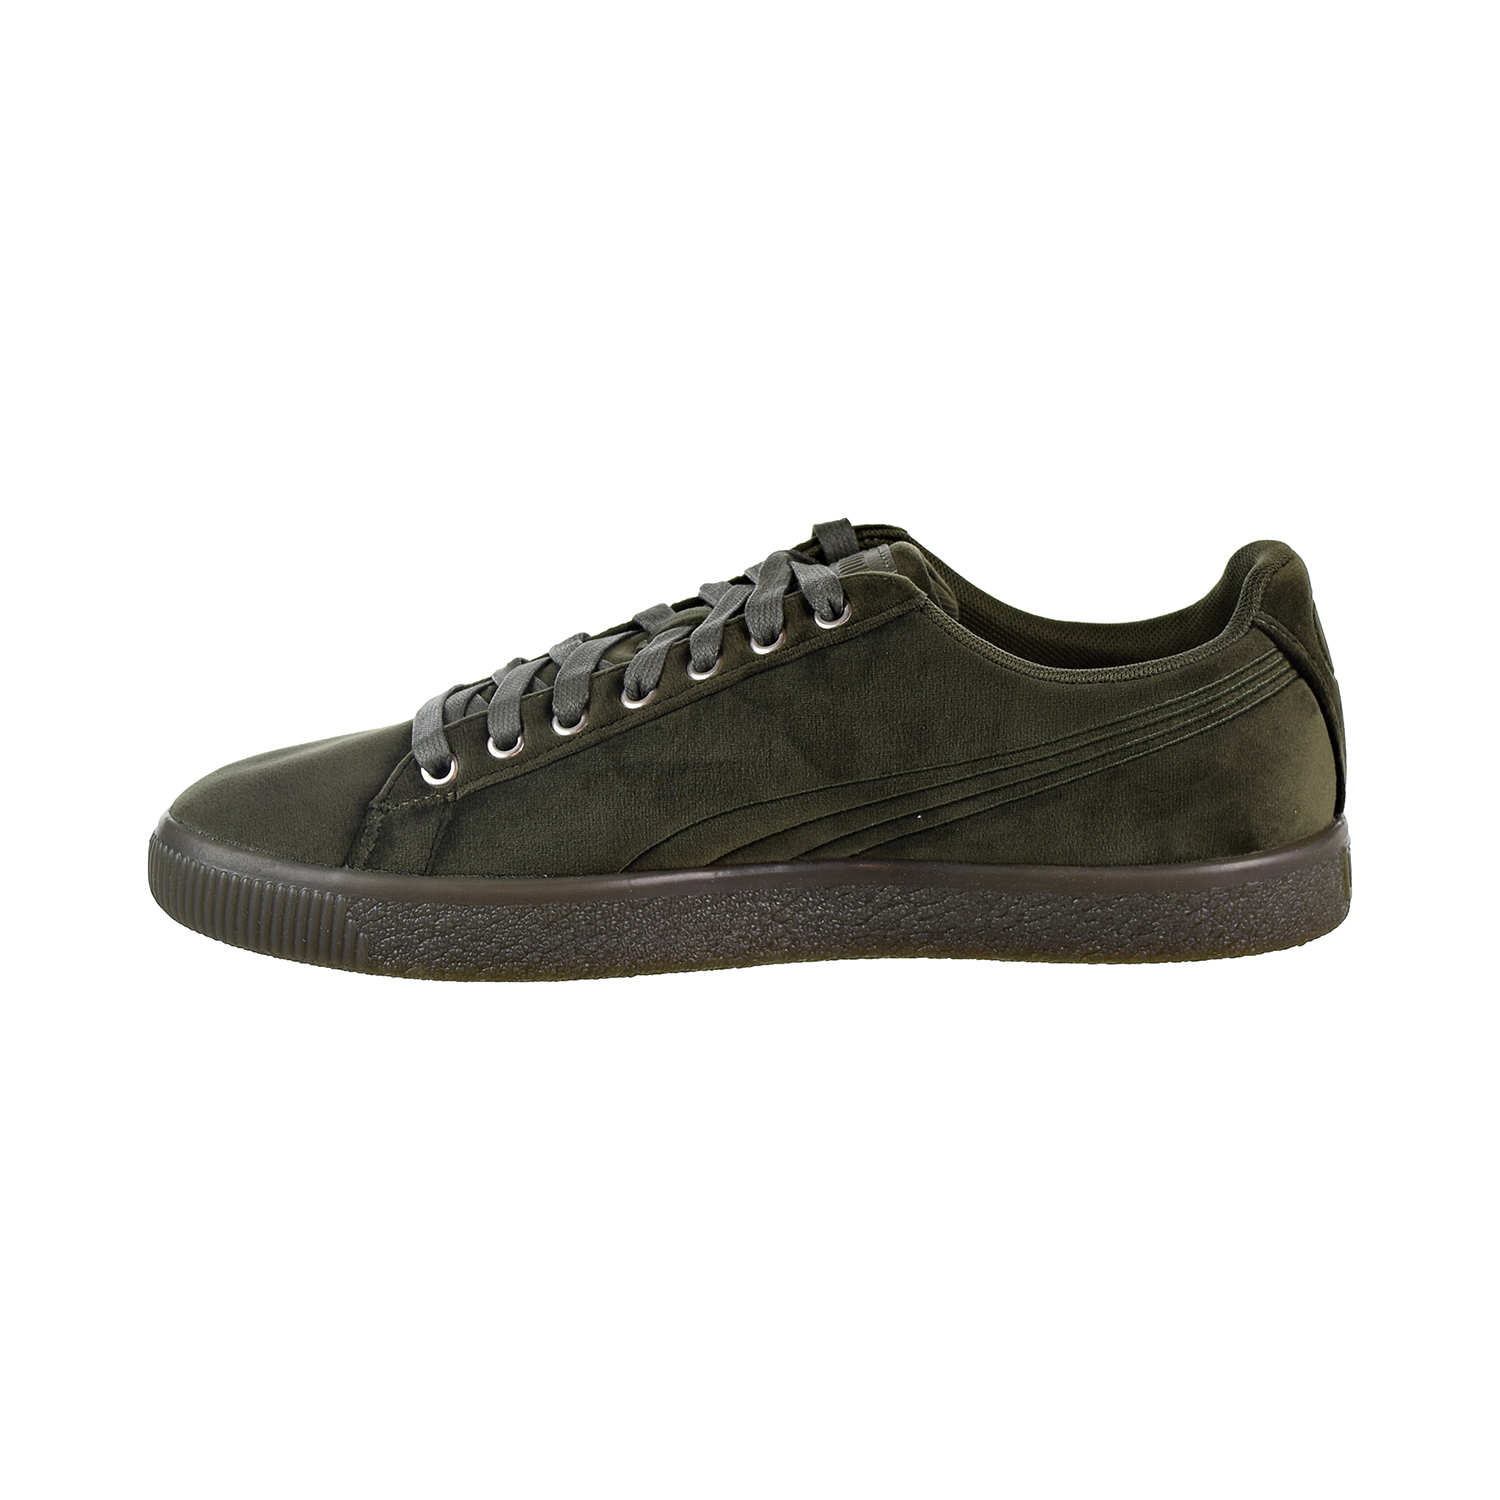 Puma clyde Velour Ice Men's Shoes Olive Green 366549-03 - image 4 of 6